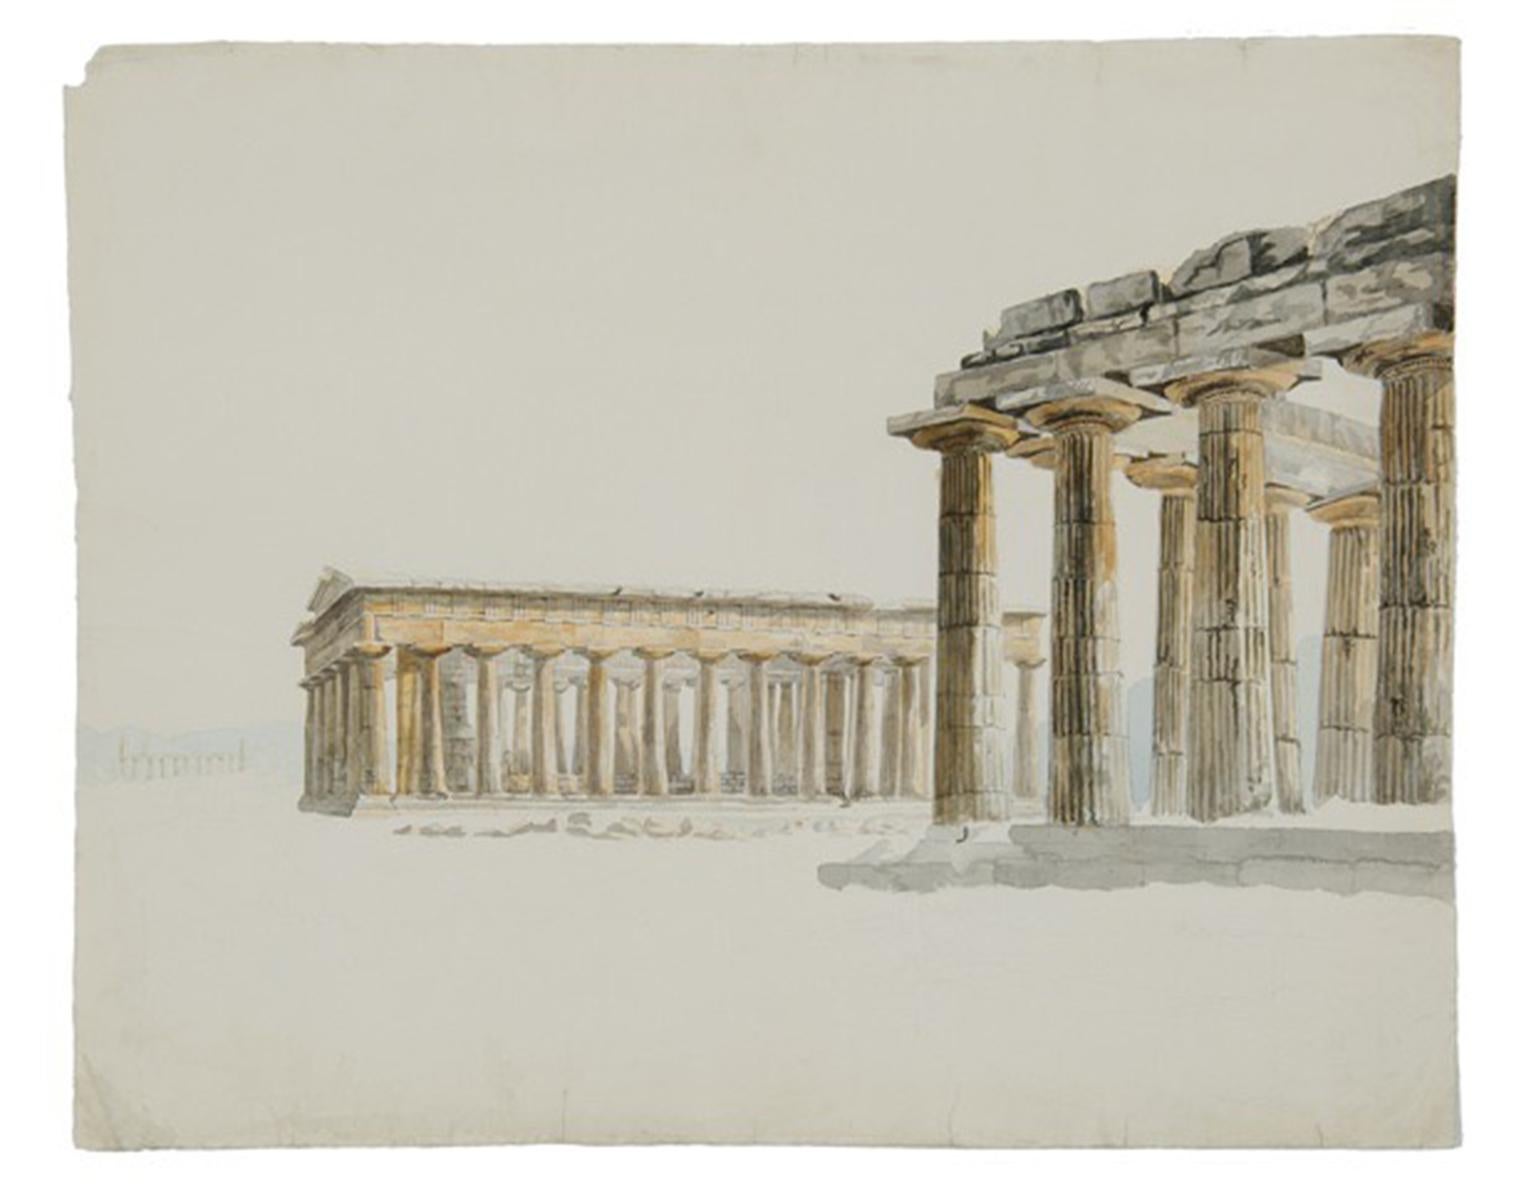 Unknown Landscape Art - Paestum - 19th century pencil and watercolour drawing of three Doric temples